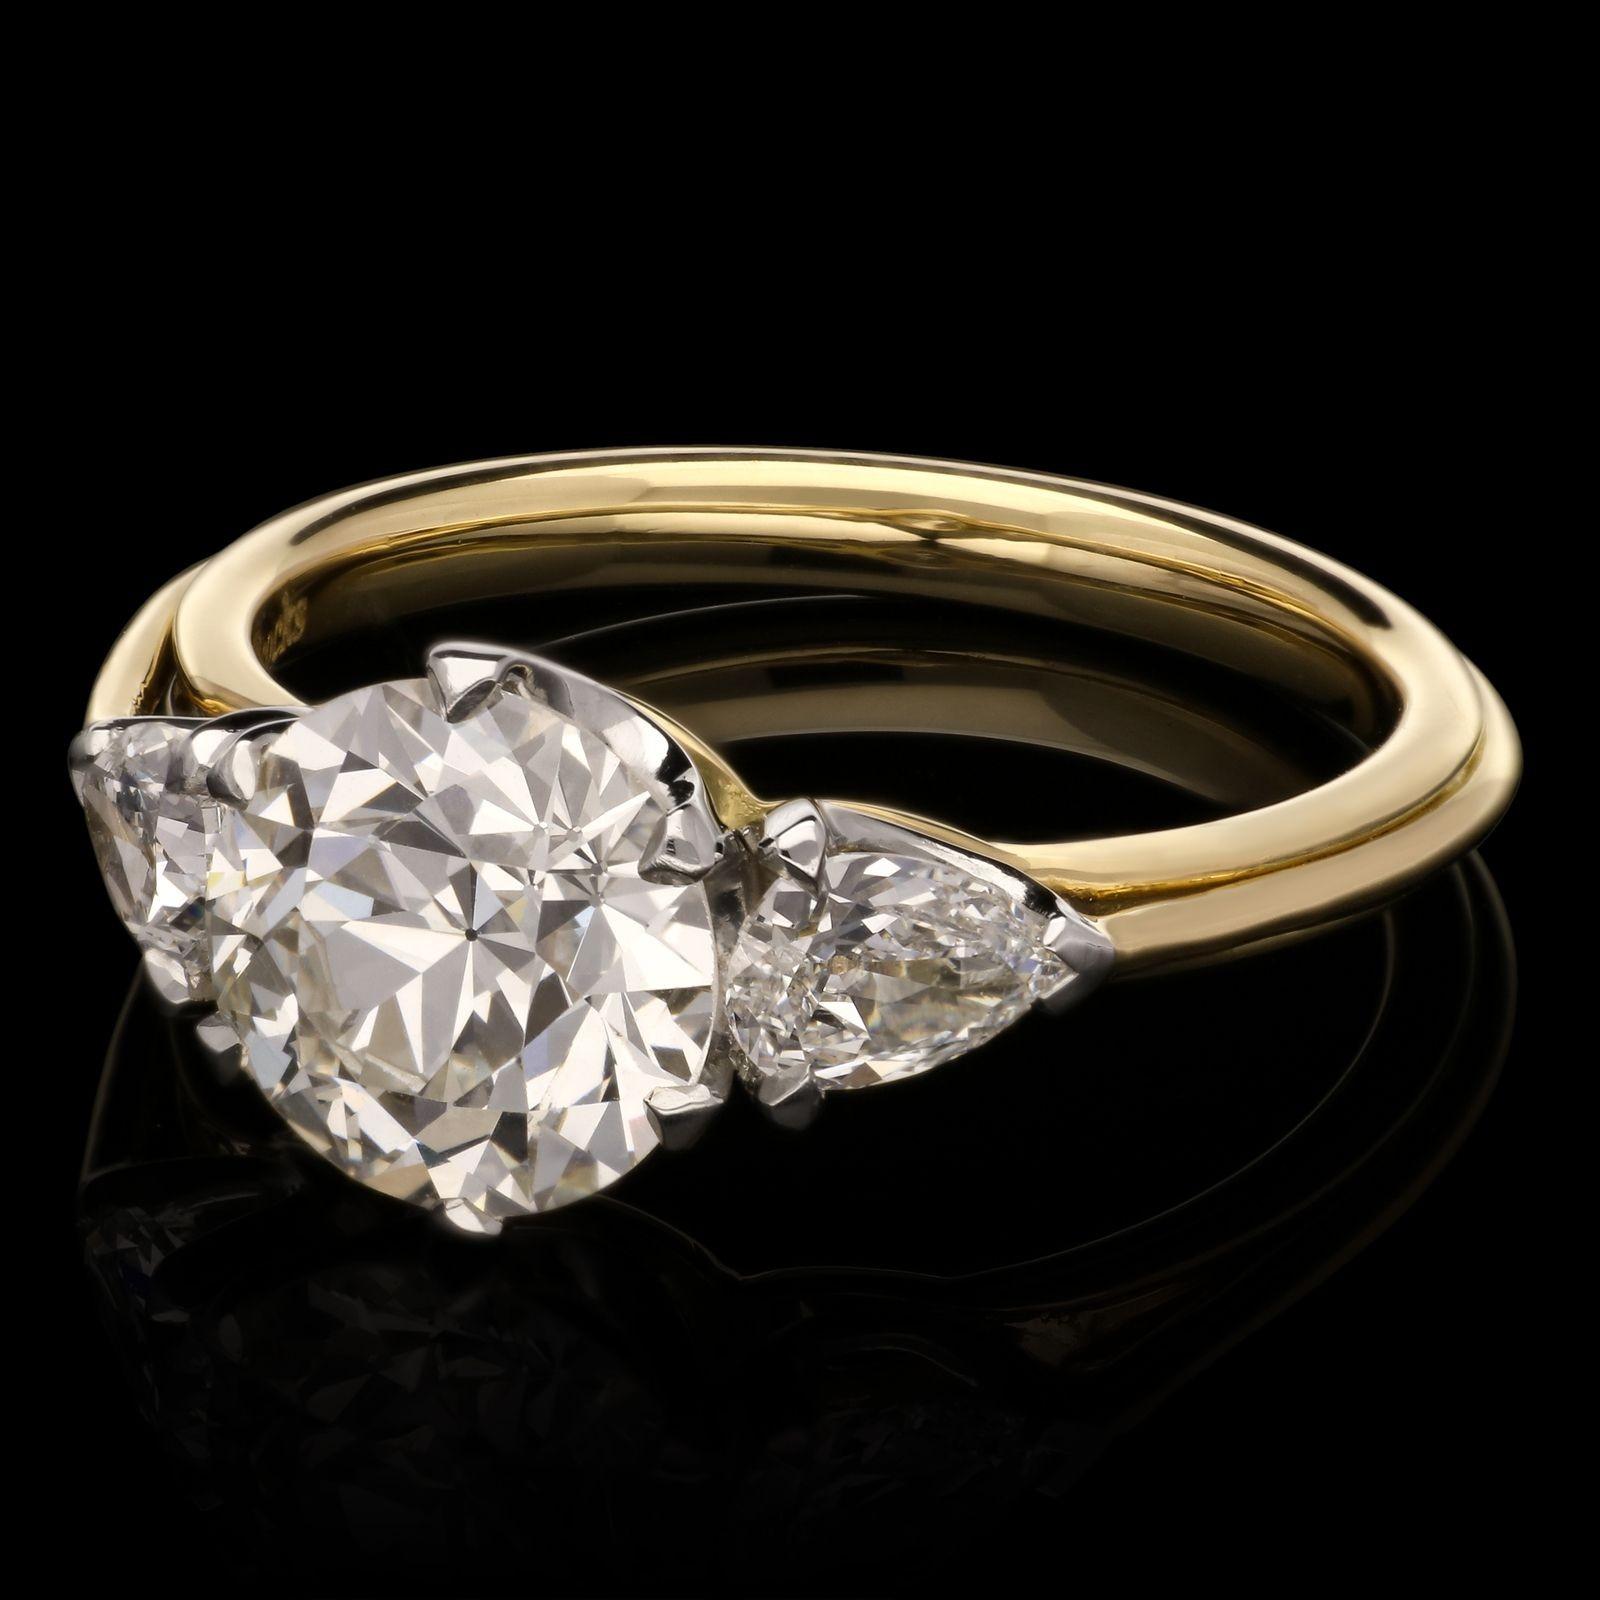 modern pear shaped engagement rings